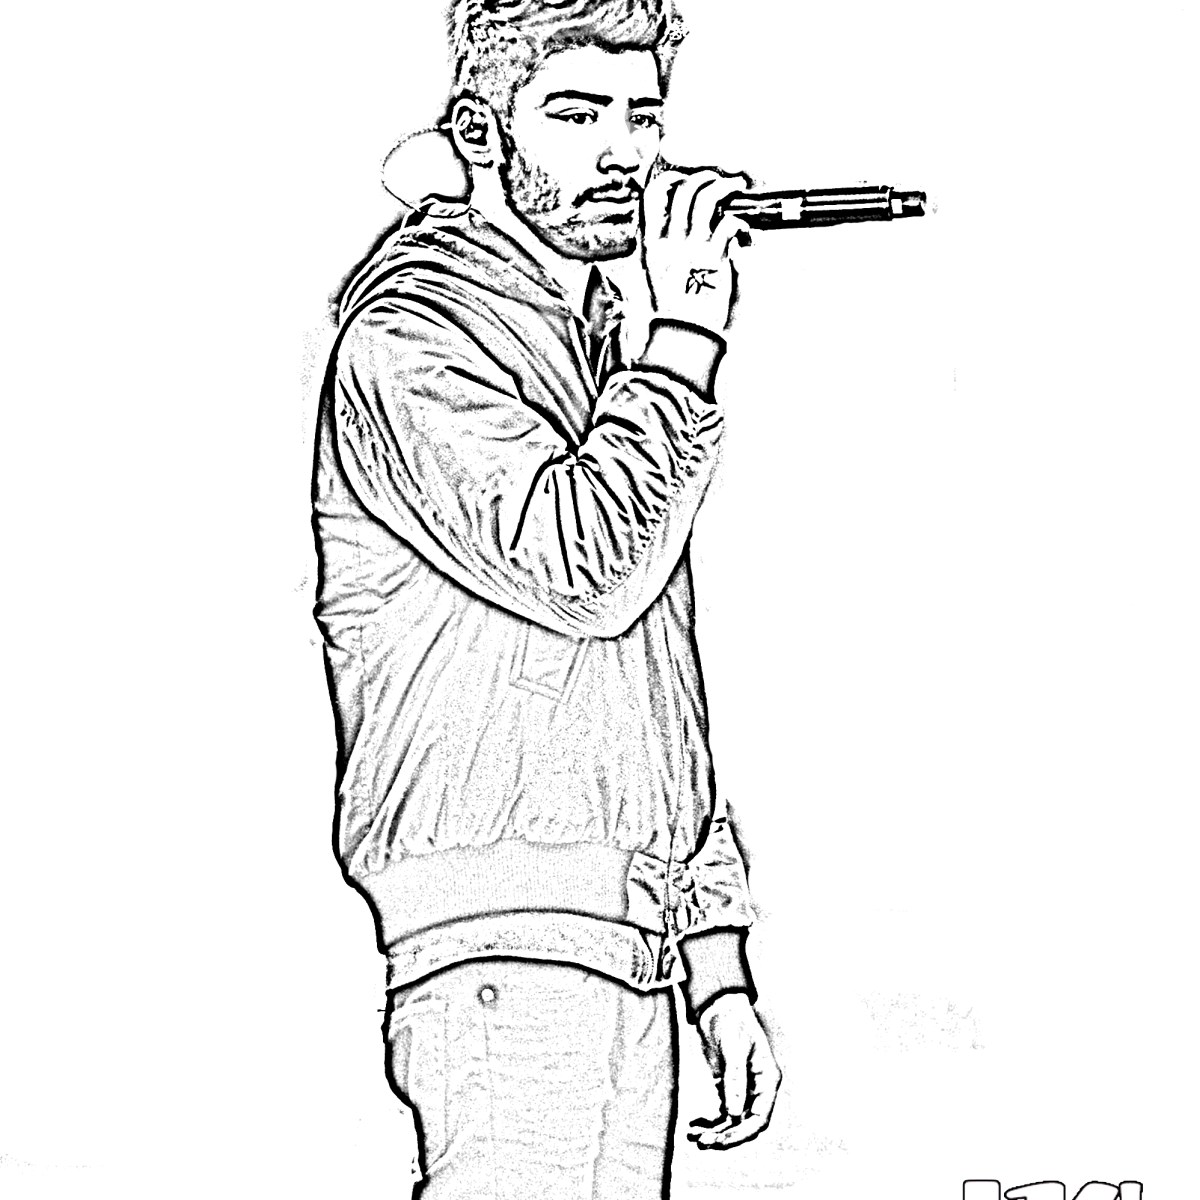 Zayn One Direction Coloring Pages See Actions Taken By The People Who Manage And Post Content